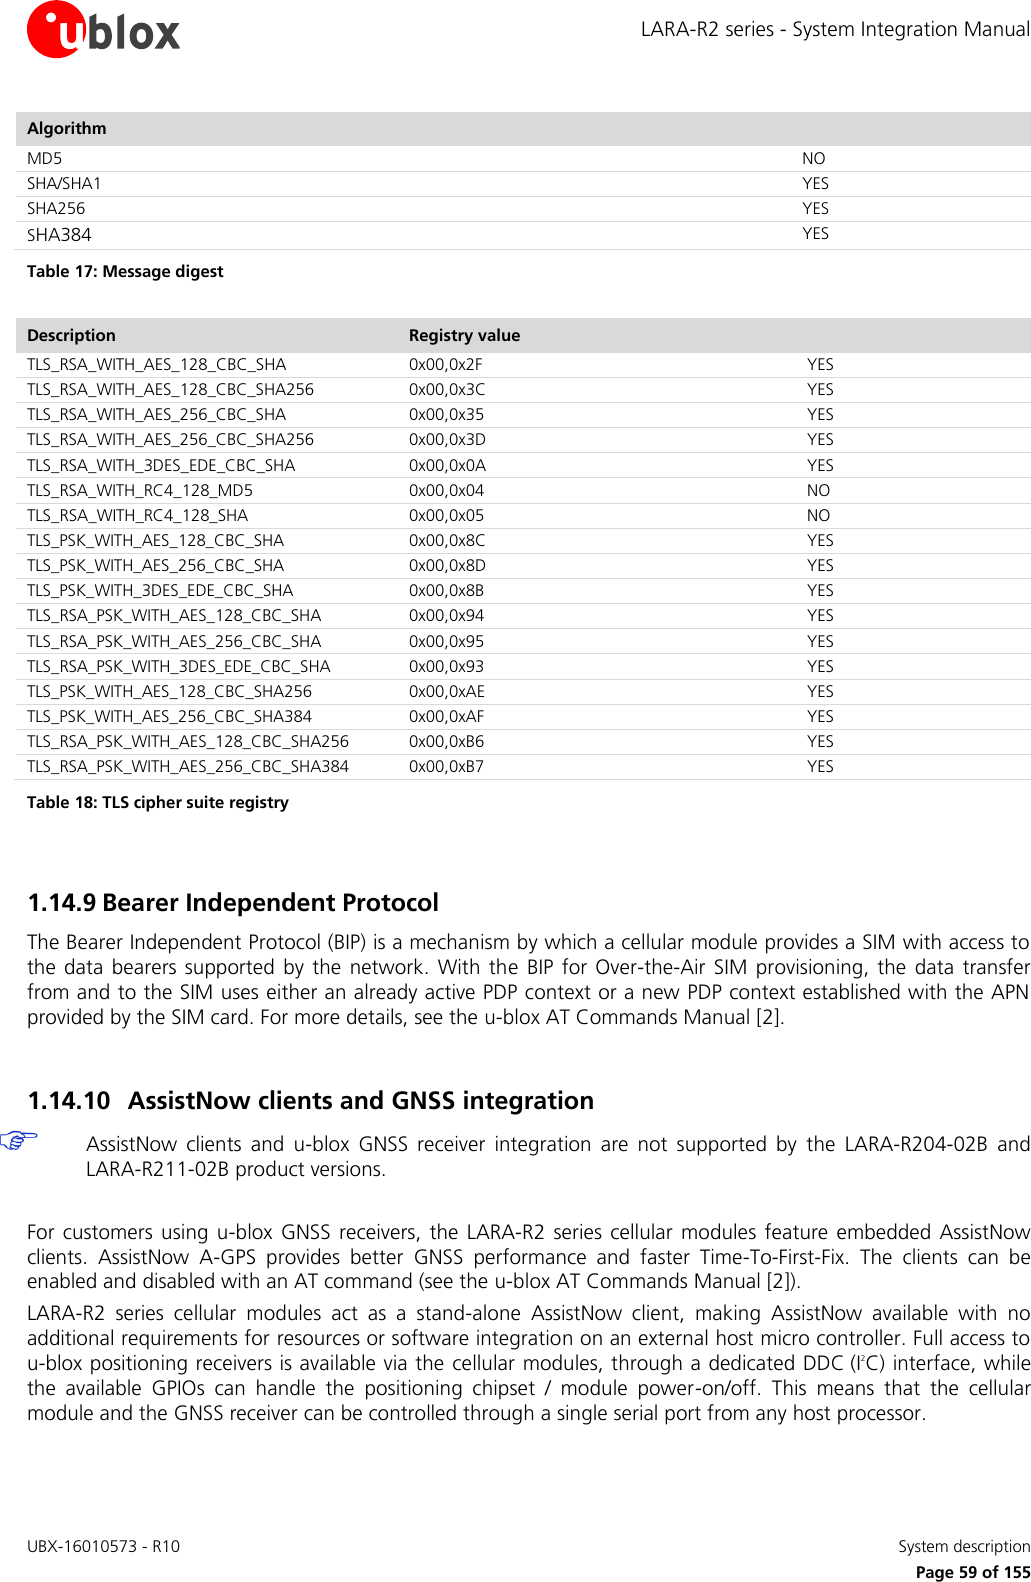 LARA-R2 series - System Integration Manual UBX-16010573 - R10    System description     Page 59 of 155 Algorithm   MD5  NO SHA/SHA1  YES SHA256  YES SHA384  YES Table 17: Message digest  Description Registry value   TLS_RSA_WITH_AES_128_CBC_SHA 0x00,0x2F  YES TLS_RSA_WITH_AES_128_CBC_SHA256 0x00,0x3C  YES TLS_RSA_WITH_AES_256_CBC_SHA 0x00,0x35  YES TLS_RSA_WITH_AES_256_CBC_SHA256 0x00,0x3D  YES TLS_RSA_WITH_3DES_EDE_CBC_SHA 0x00,0x0A  YES TLS_RSA_WITH_RC4_128_MD5 0x00,0x04  NO TLS_RSA_WITH_RC4_128_SHA 0x00,0x05  NO TLS_PSK_WITH_AES_128_CBC_SHA 0x00,0x8C  YES TLS_PSK_WITH_AES_256_CBC_SHA 0x00,0x8D  YES TLS_PSK_WITH_3DES_EDE_CBC_SHA 0x00,0x8B  YES TLS_RSA_PSK_WITH_AES_128_CBC_SHA 0x00,0x94  YES TLS_RSA_PSK_WITH_AES_256_CBC_SHA 0x00,0x95  YES TLS_RSA_PSK_WITH_3DES_EDE_CBC_SHA 0x00,0x93  YES TLS_PSK_WITH_AES_128_CBC_SHA256 0x00,0xAE  YES TLS_PSK_WITH_AES_256_CBC_SHA384 0x00,0xAF  YES TLS_RSA_PSK_WITH_AES_128_CBC_SHA256 0x00,0xB6  YES TLS_RSA_PSK_WITH_AES_256_CBC_SHA384 0x00,0xB7  YES Table 18: TLS cipher suite registry  1.14.9 Bearer Independent Protocol The Bearer Independent Protocol (BIP) is a mechanism by which a cellular module provides a SIM with access to the  data  bearers  supported by  the  network.  With the  BIP  for Over-the-Air  SIM provisioning,  the  data  transfer from and to the SIM uses either an already active PDP context or a new PDP context established with the APN provided by the SIM card. For more details, see the u-blox AT Commands Manual [2].  1.14.10 AssistNow clients and GNSS integration  AssistNow  clients  and  u-blox  GNSS  receiver  integration  are  not  supported  by  the  LARA-R204-02B  and  LARA-R211-02B product versions.  For customers  using  u-blox  GNSS  receivers,  the  LARA-R2 series  cellular  modules feature  embedded AssistNow clients.  AssistNow  A-GPS  provides  better  GNSS  performance  and  faster  Time-To-First-Fix.  The  clients  can  be enabled and disabled with an AT command (see the u-blox AT Commands Manual [2]). LARA-R2  series  cellular  modules  act  as  a  stand-alone  AssistNow  client,  making  AssistNow  available  with  no additional requirements for resources or software integration on an external host micro controller. Full access to u-blox positioning receivers is available via the cellular modules, through a dedicated DDC (I2C) interface, while the  available  GPIOs  can  handle  the  positioning  chipset  /  module  power-on/off.  This  means  that  the  cellular module and the GNSS receiver can be controlled through a single serial port from any host processor.  